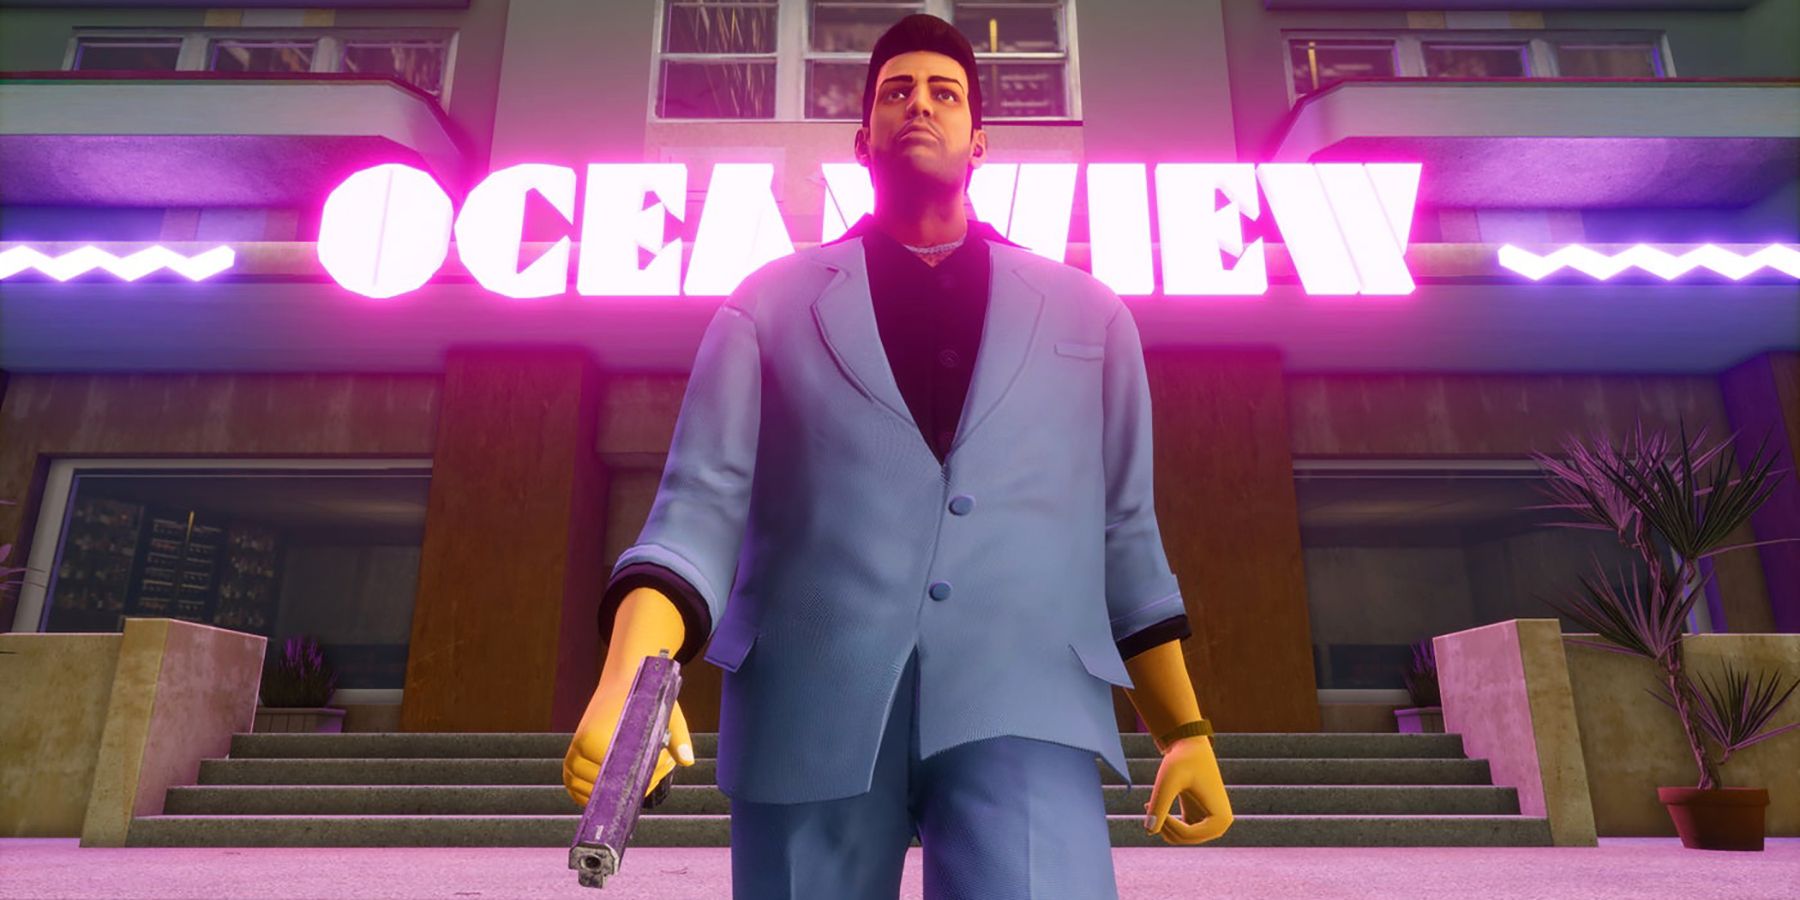 GTA mod is the closest you can get to Vice City 2